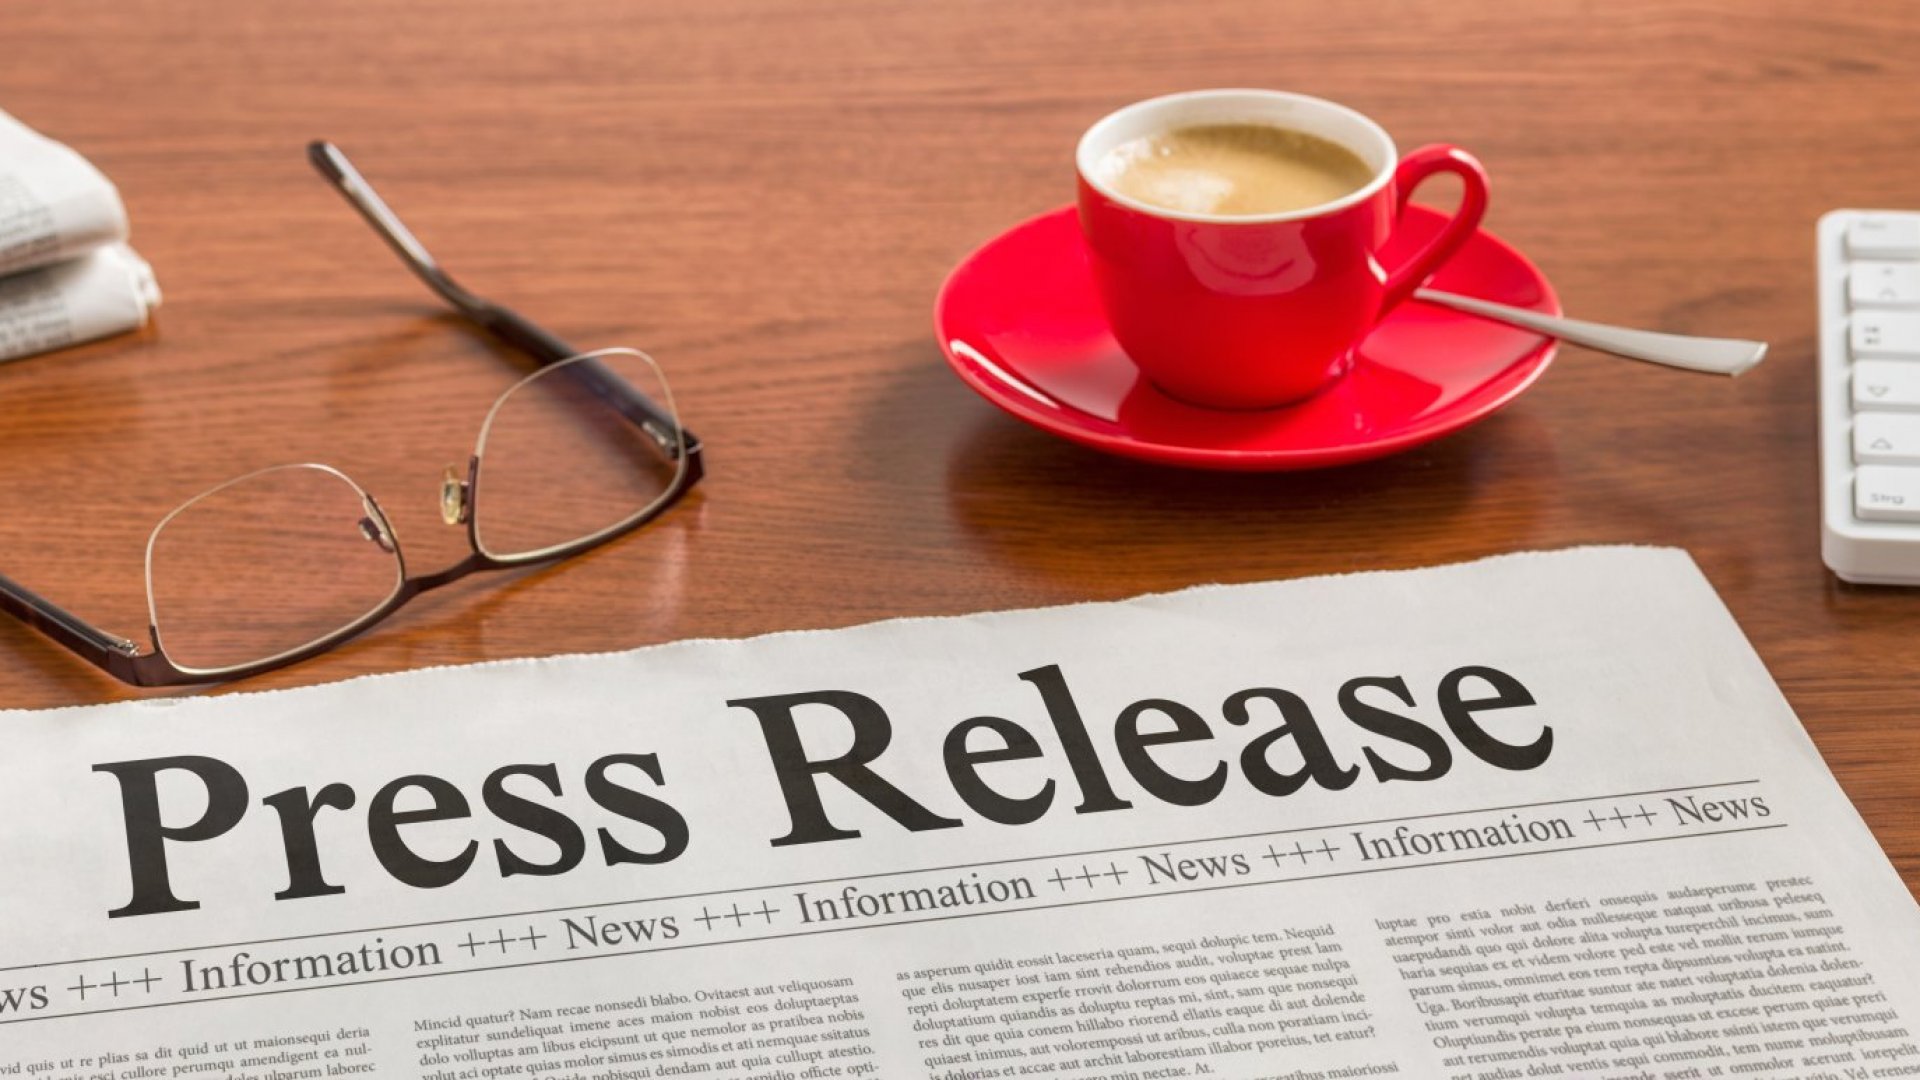 Distribution Strategies for Press Releases